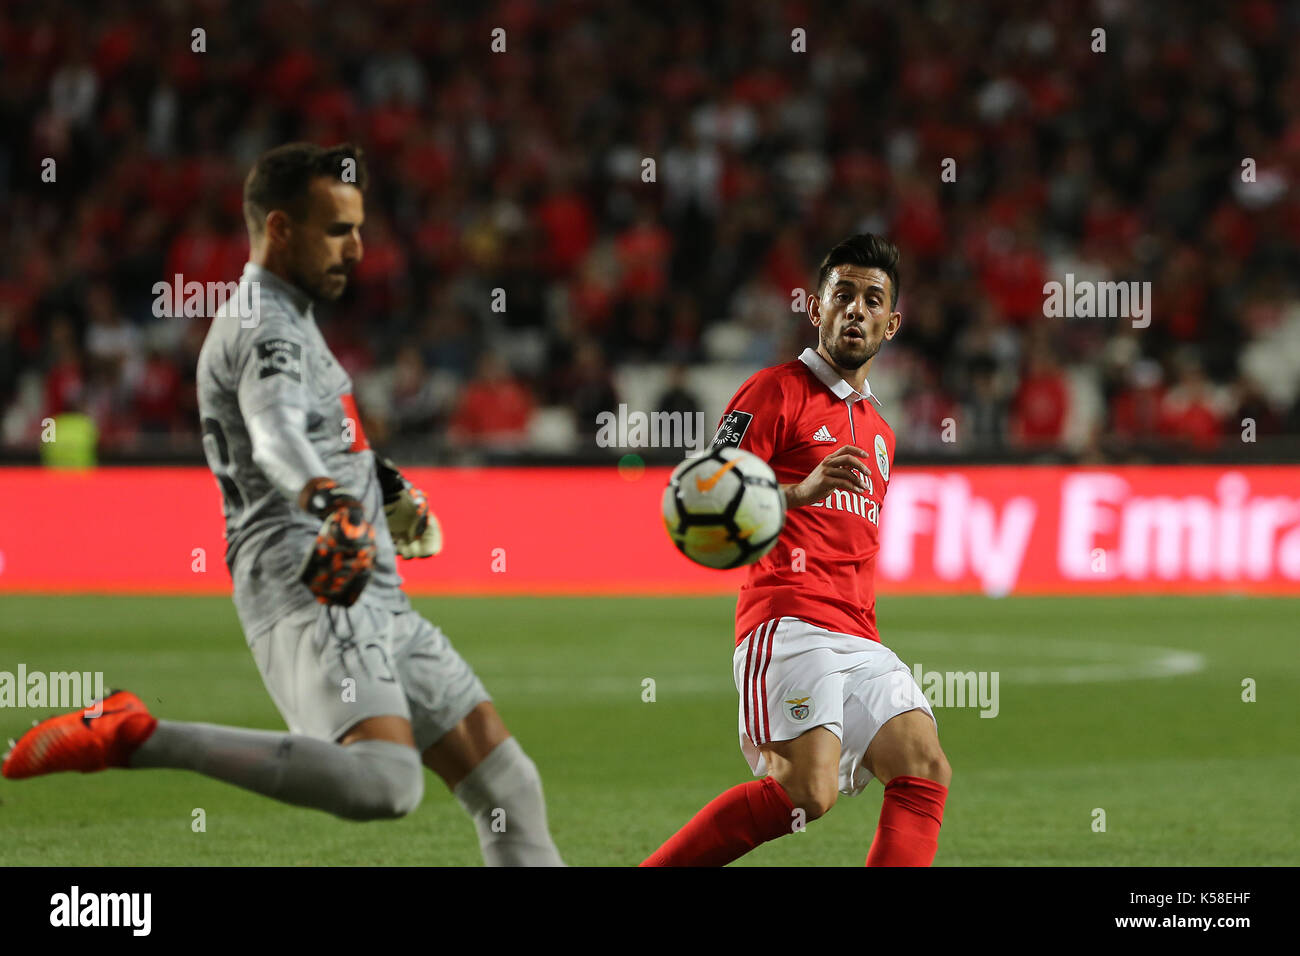 Portimonense«s goalkeeper Ricardo Ferreira from Portugal  (L) and Benfica«s midfielder Pizzi from Portugal (R) during the Premier League 2017/18 match between SL Benfica v Portimonense SC, at Luz Stadium in Lisbon on September 8, 2017. (Photo by Bruno Barros / DPI) Stock Photo